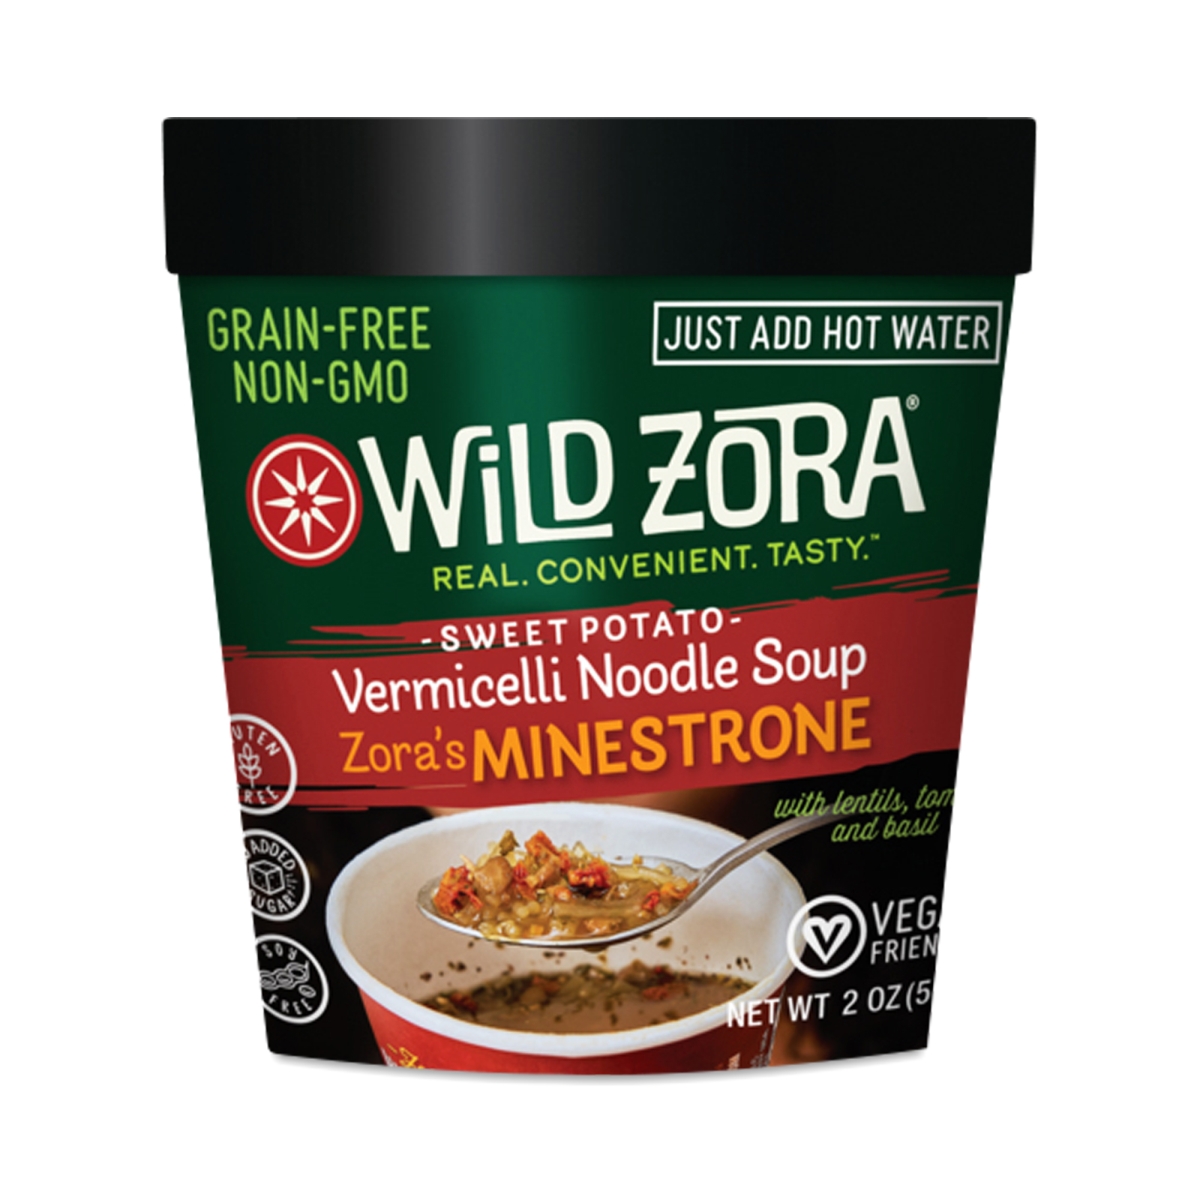 Picture of Wild Zora Foods 2305279 2 oz Minestrone Vermicelli Noodle Soup - Pack of 8